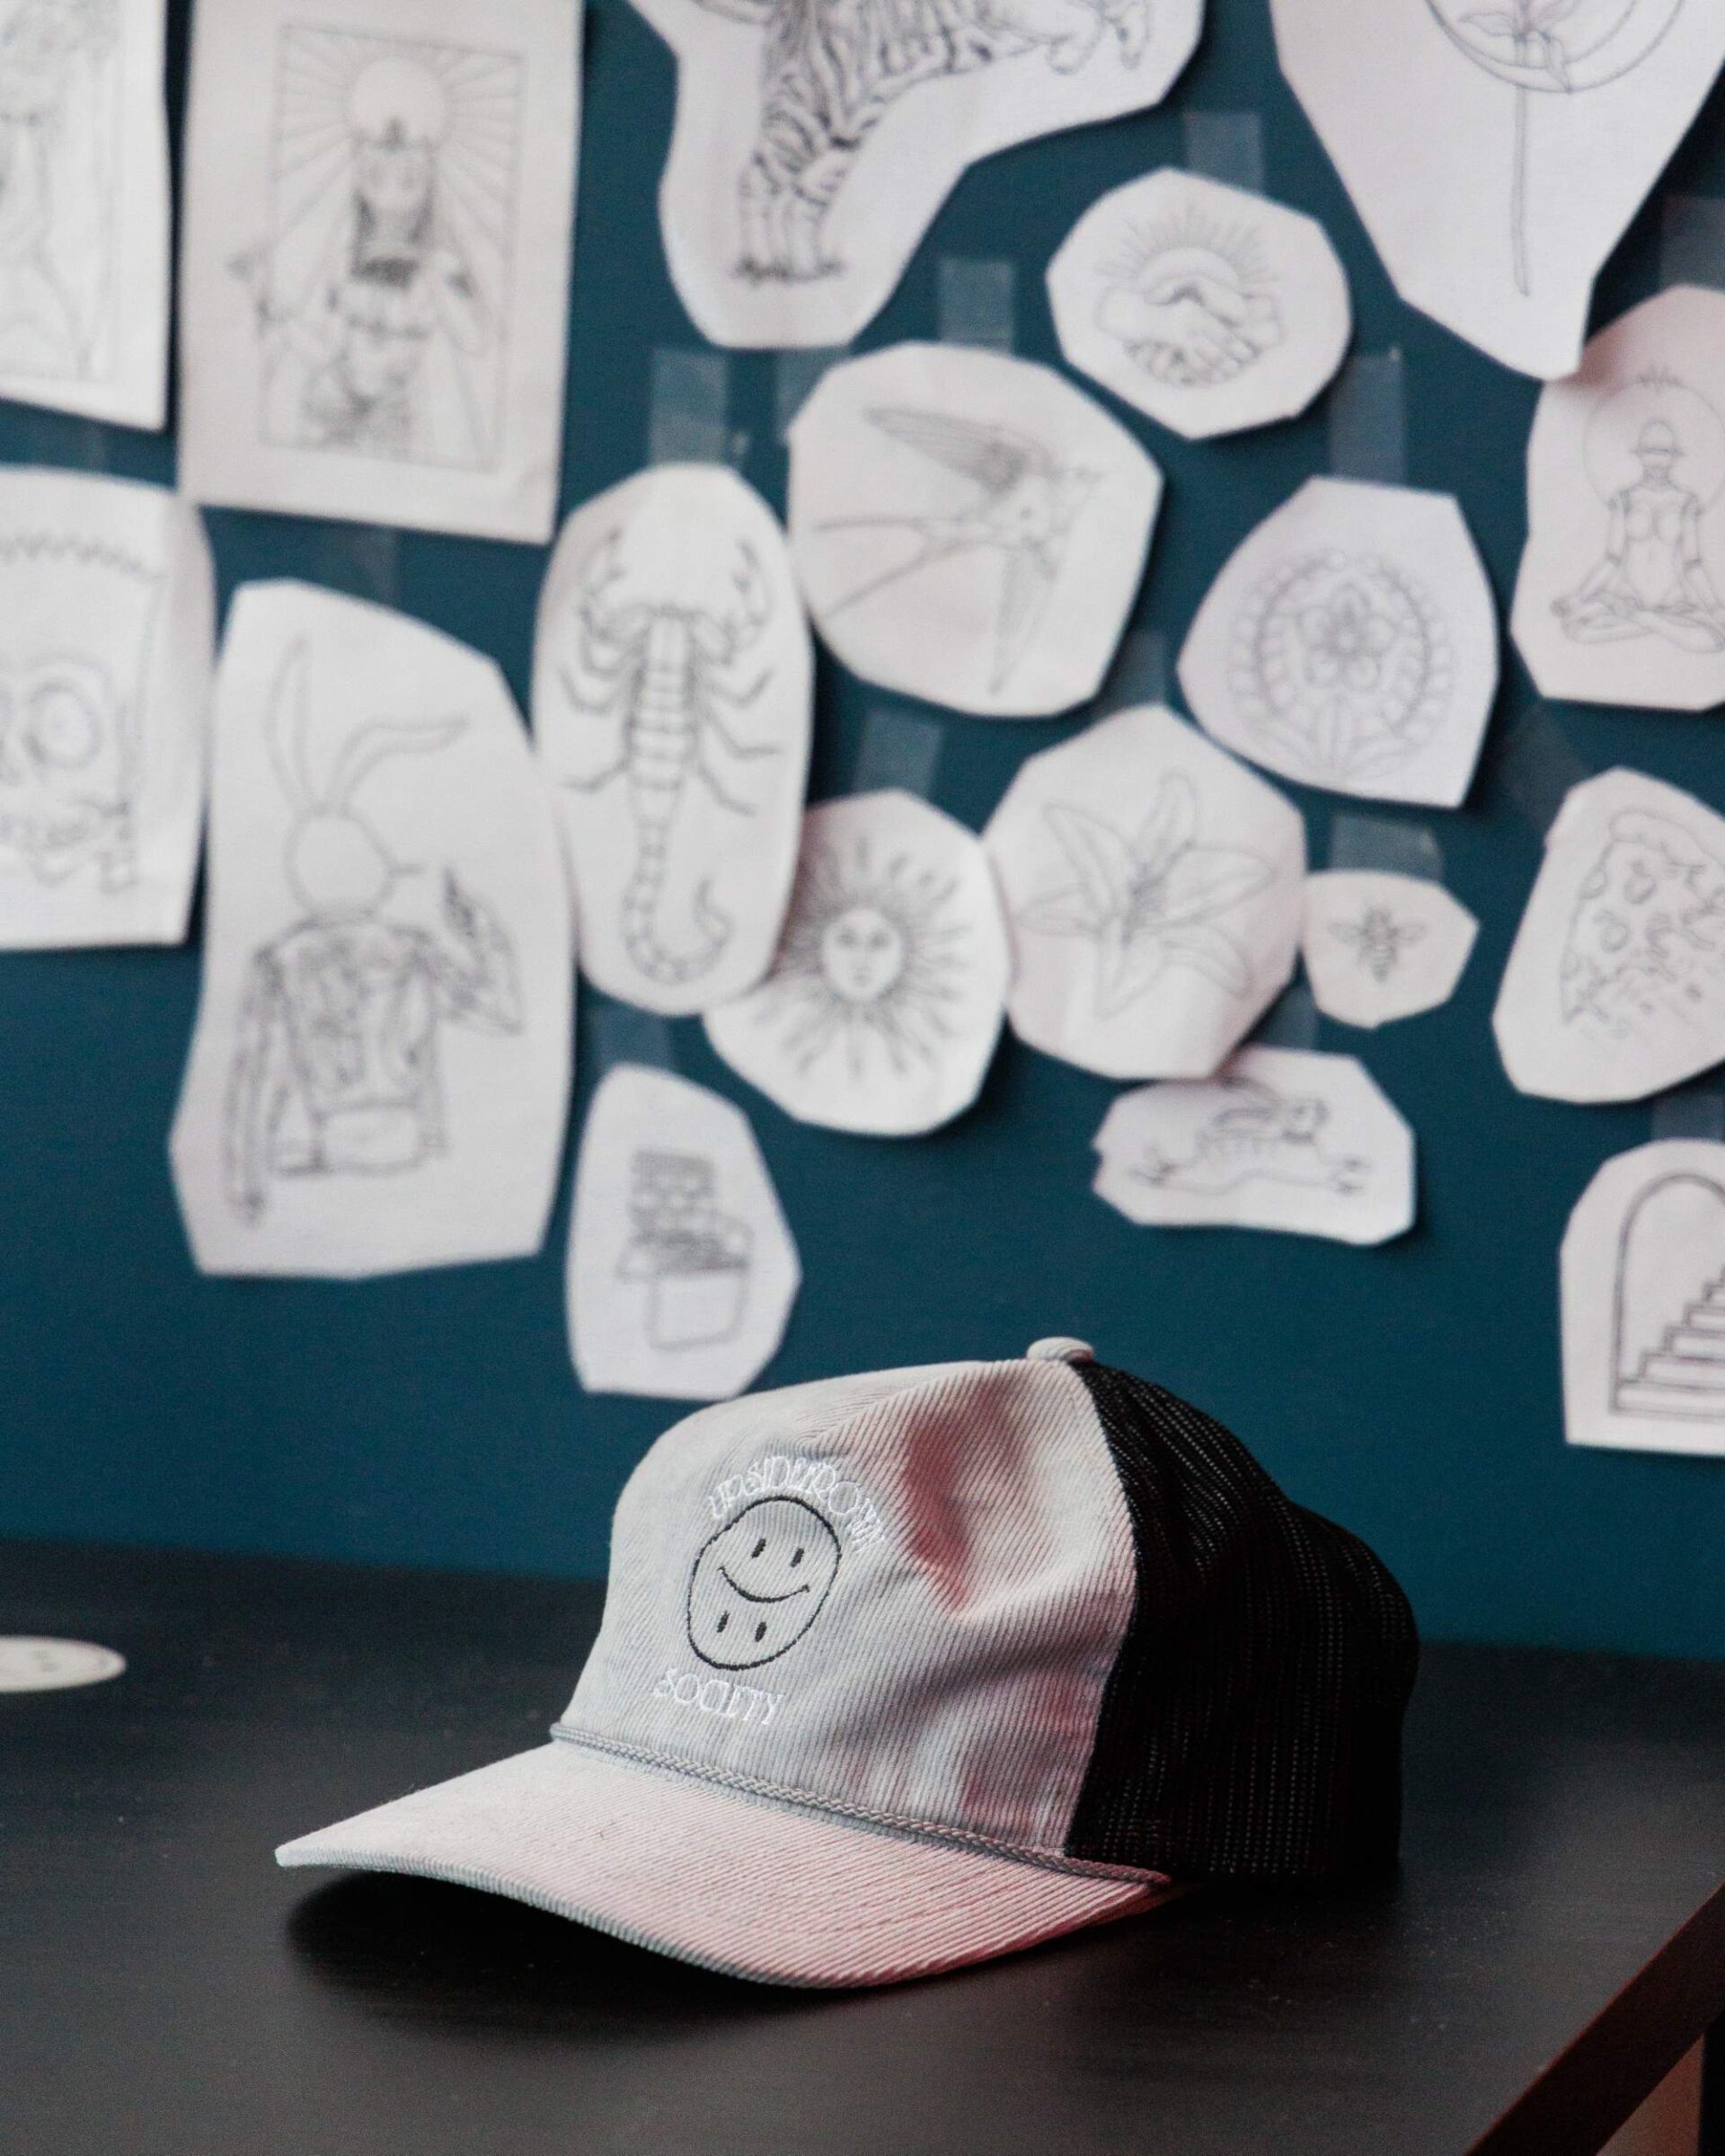 An image of a hat on a table with pictures i the background.